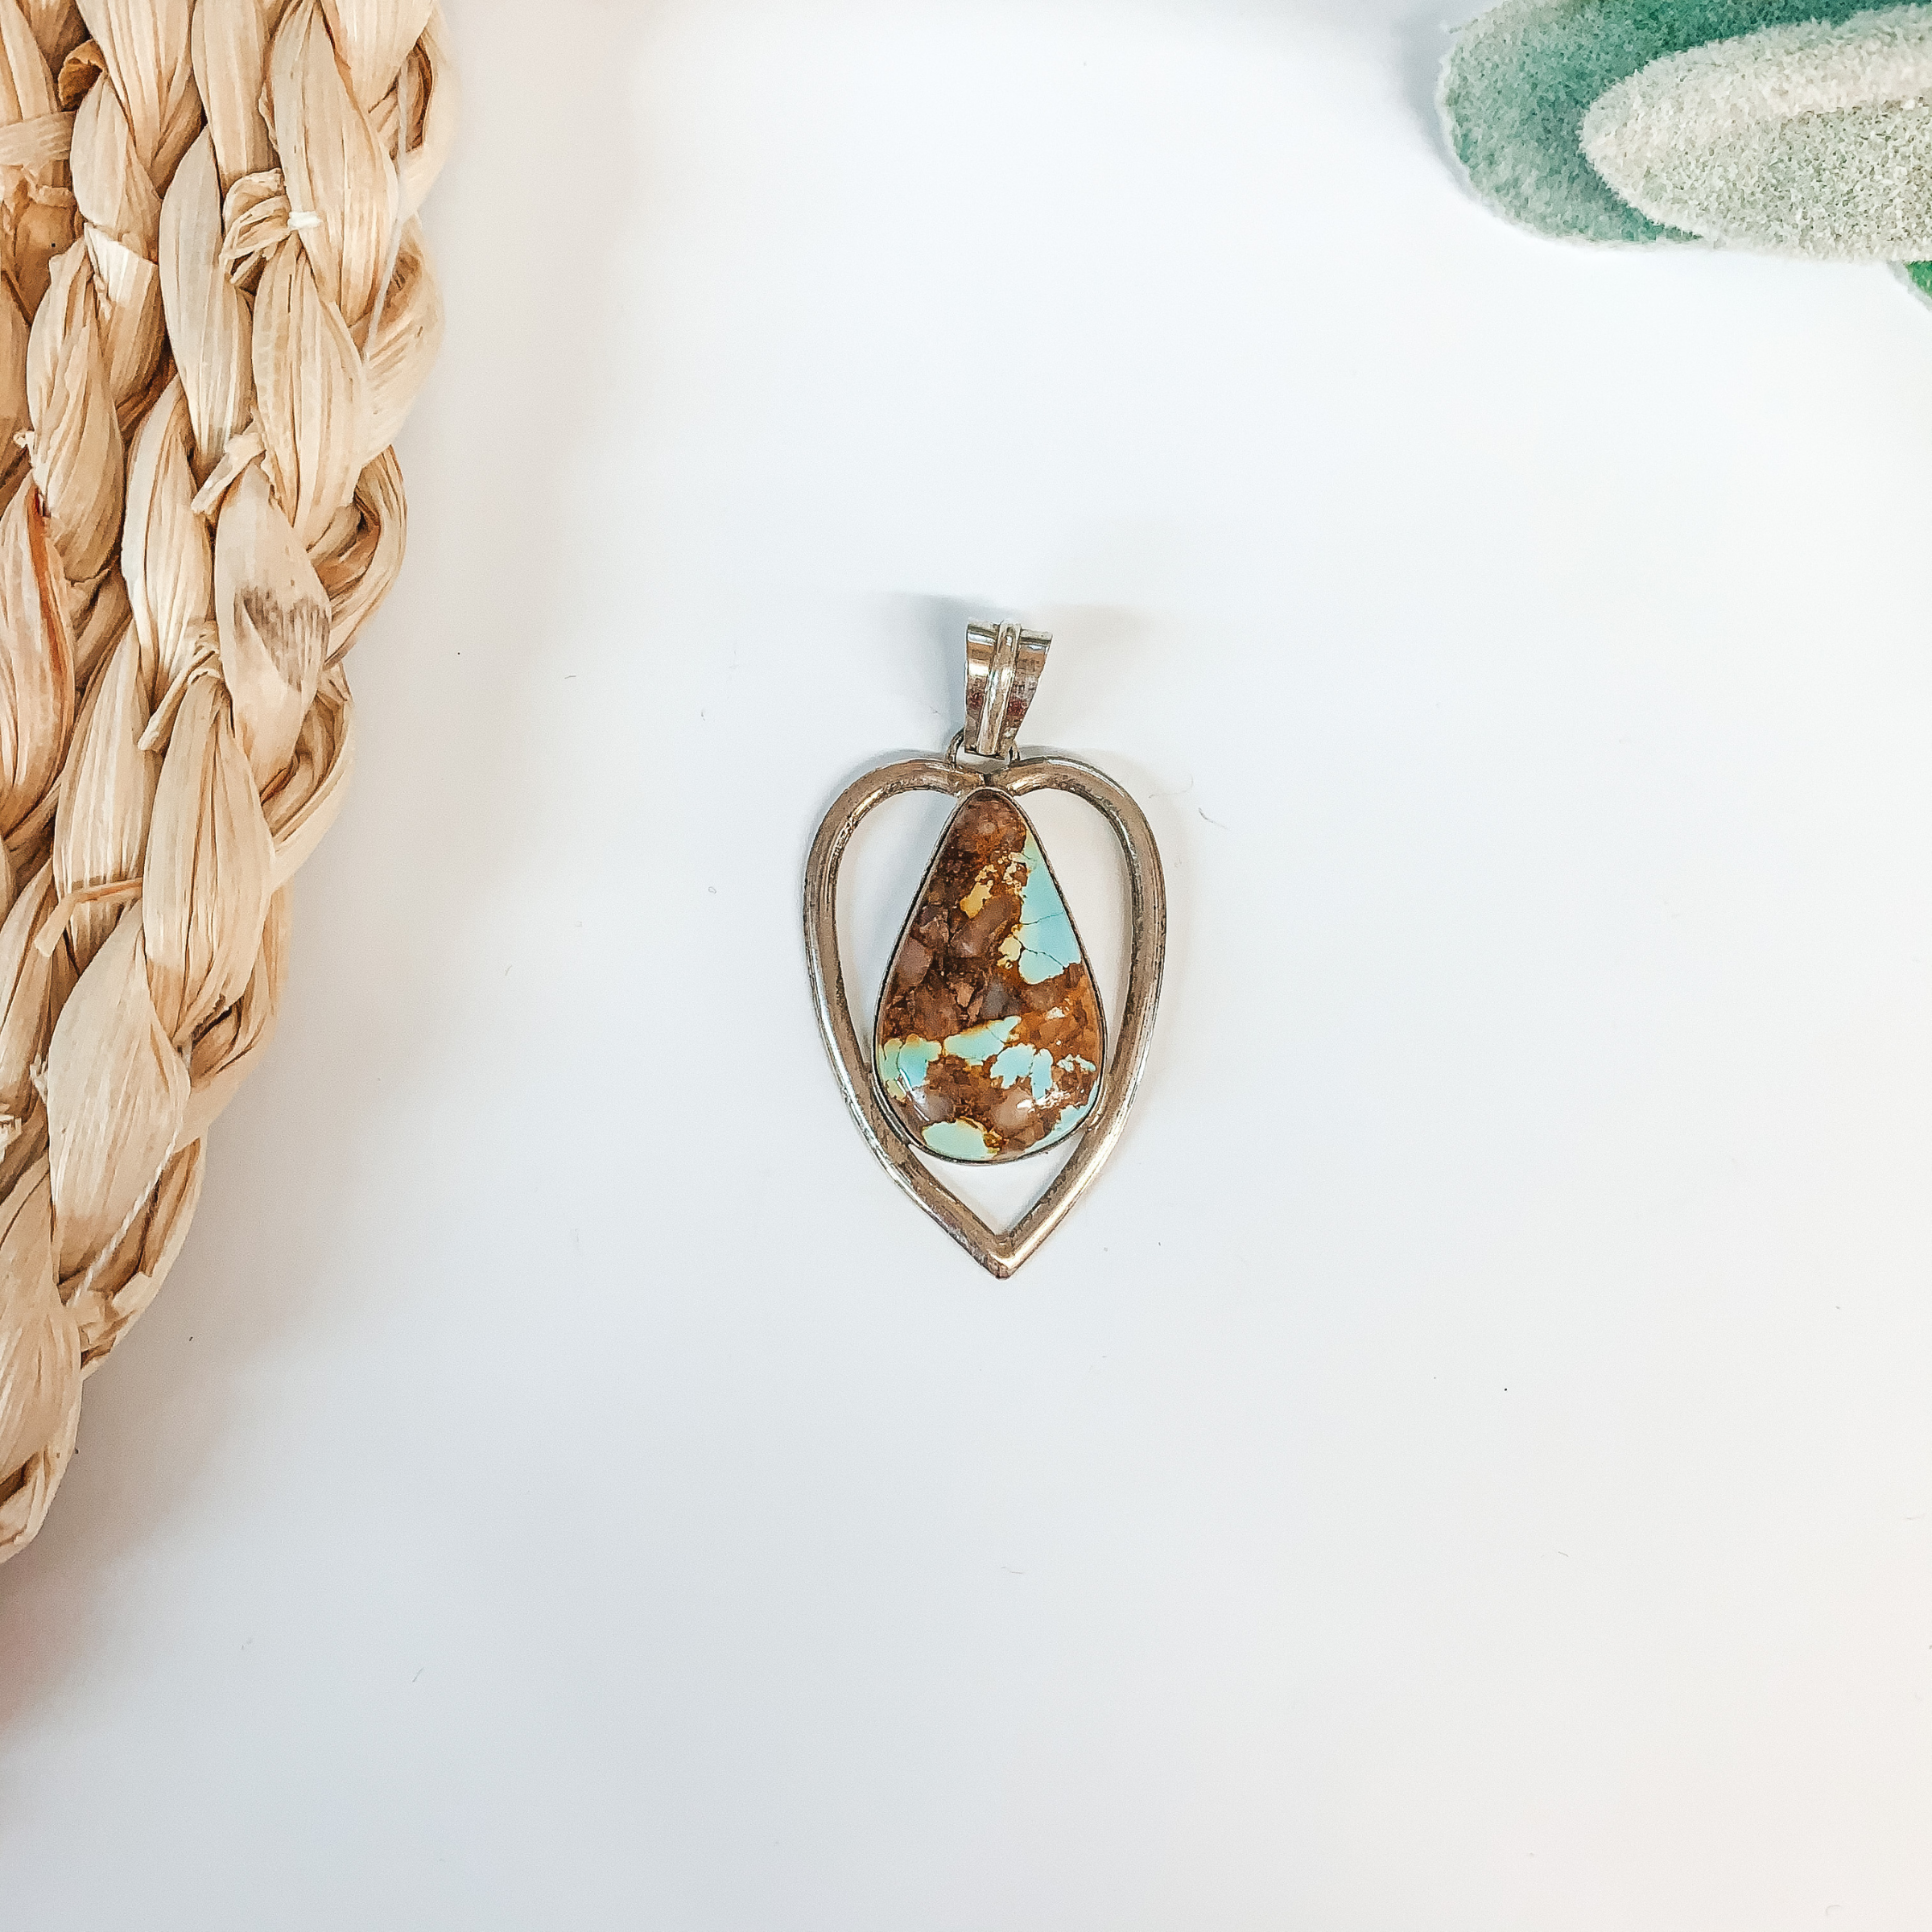 Dave Skeets | Navajo Handmade Sterling Silver Heart Pendant with Turquoise Stone - Giddy Up Glamour Boutique